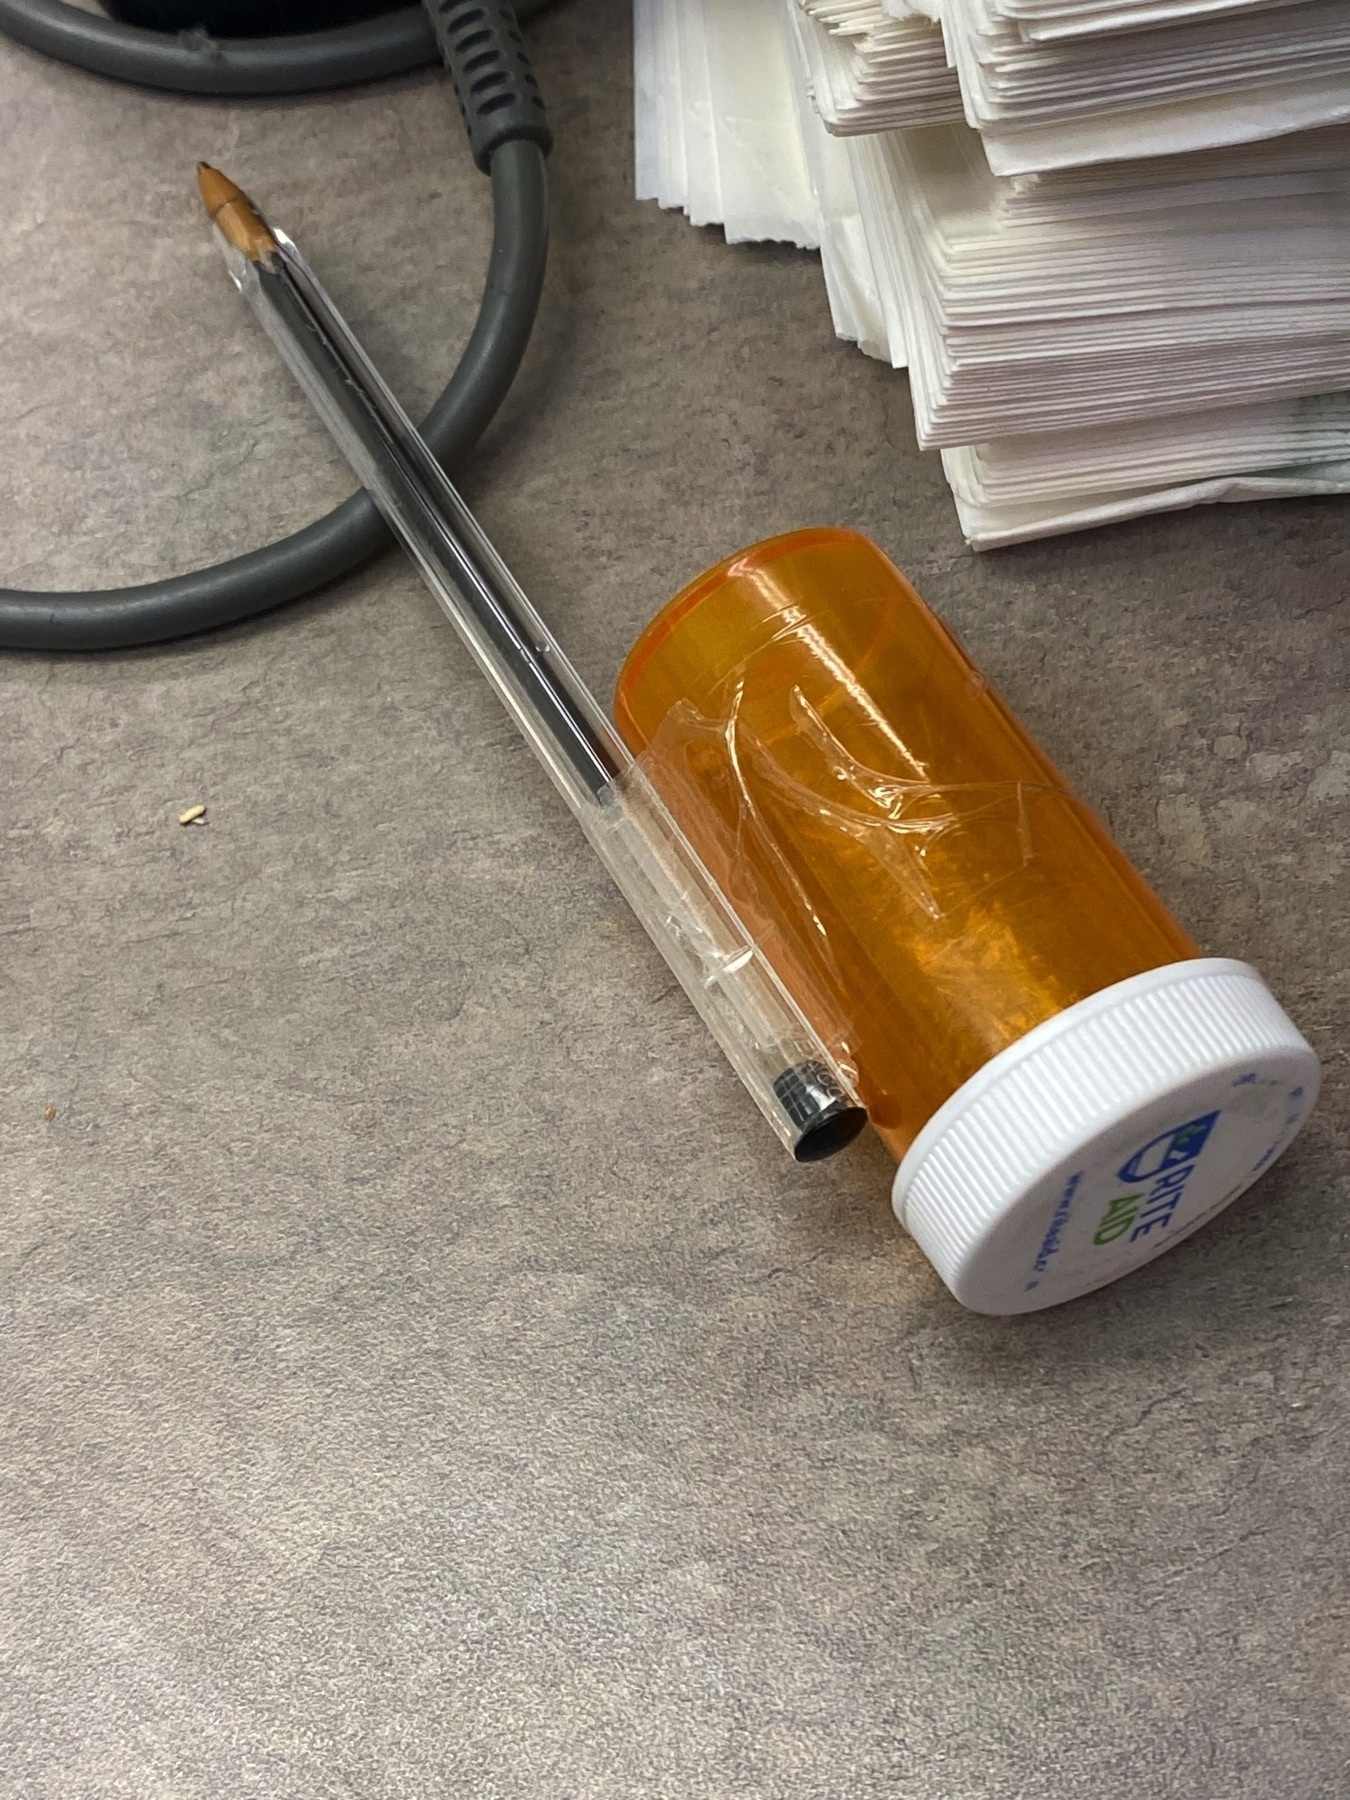 A Pen with an empty pill holder taped to it.